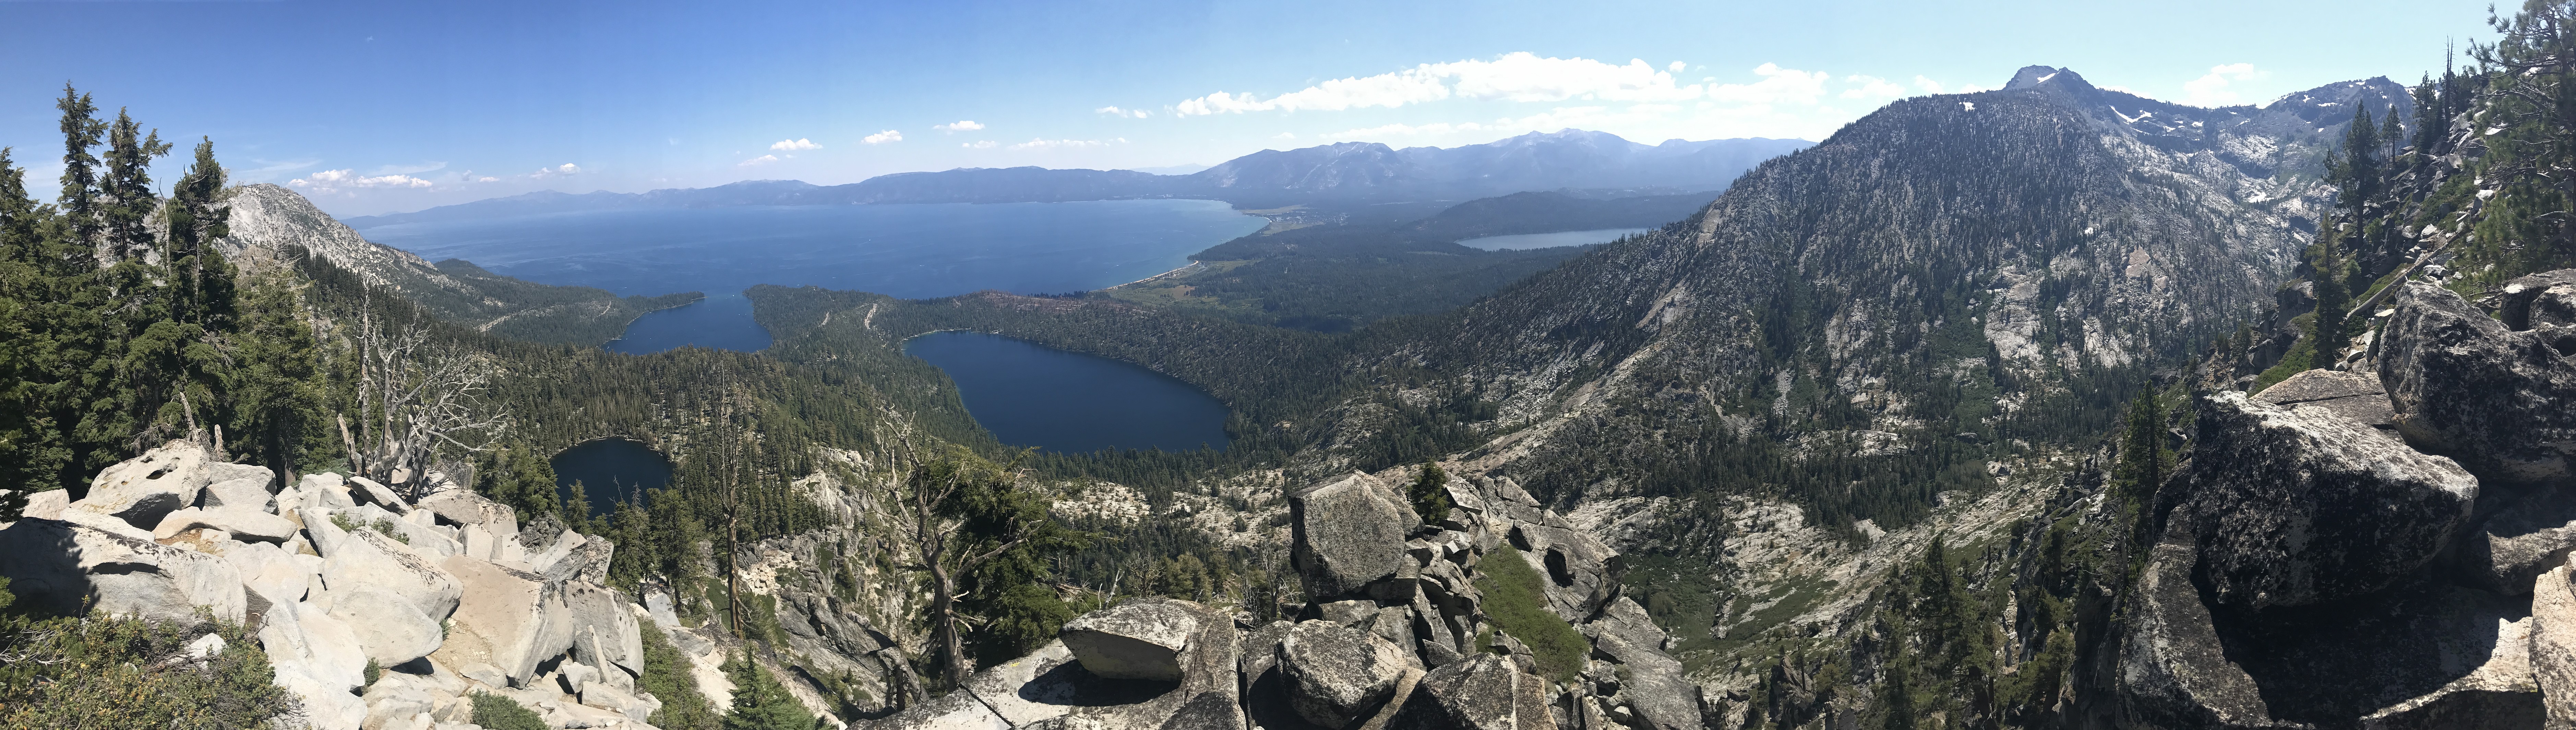 A wider panoramic view of the rocks surrounding Maggie's Peaks and the lakes down below. 8/24/2017 Lake Tahoe